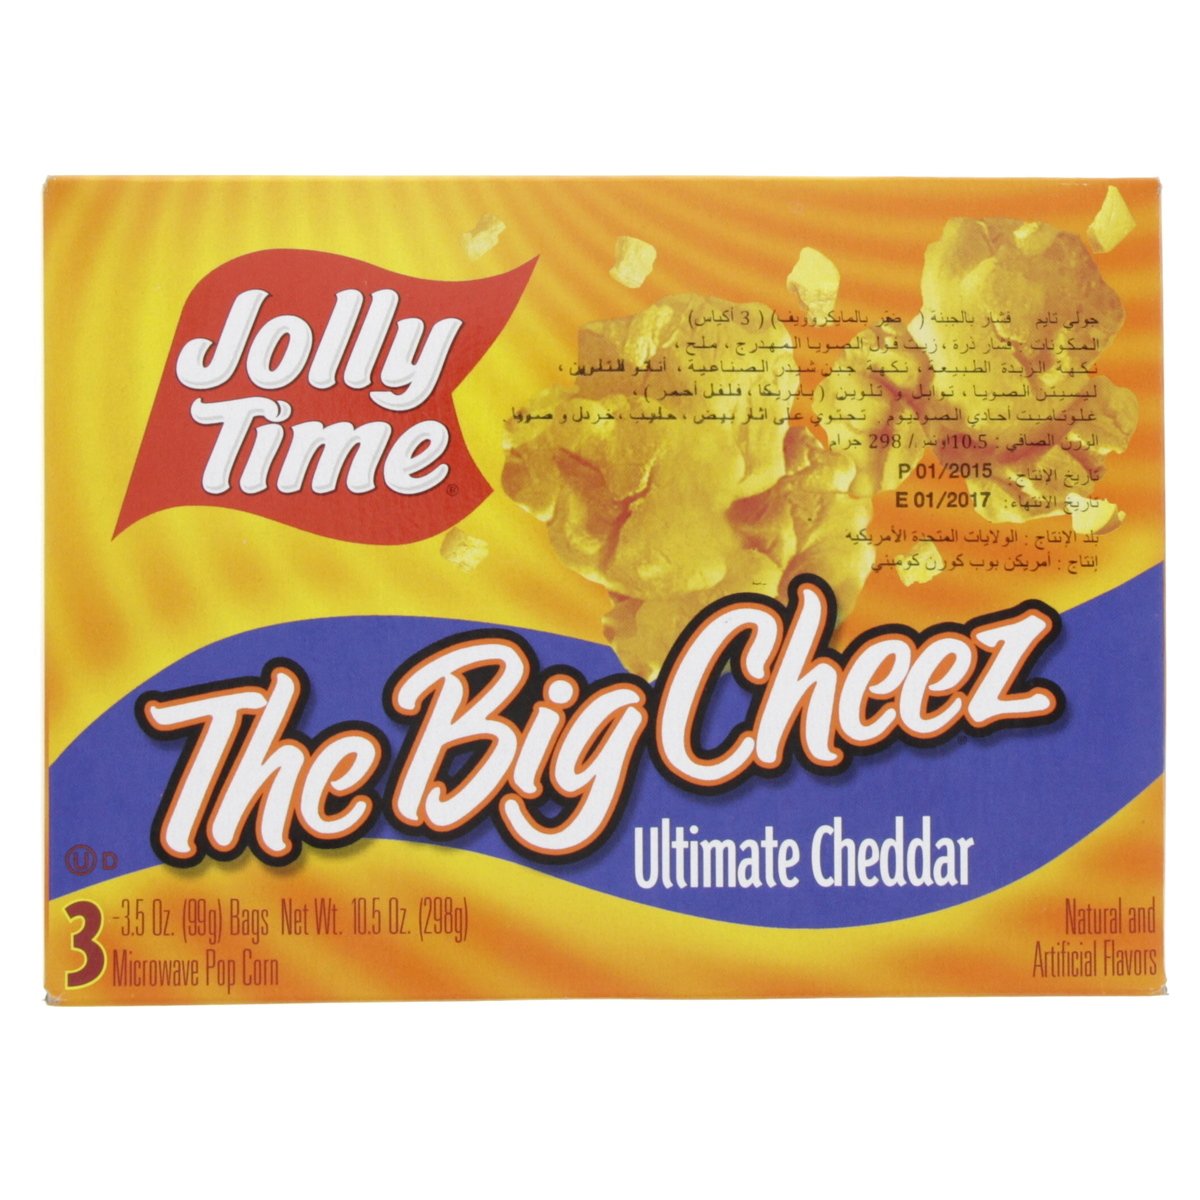 Jolly Time The Big Cheez Ultimate Cheddar Microwave Pop Corn 298 g